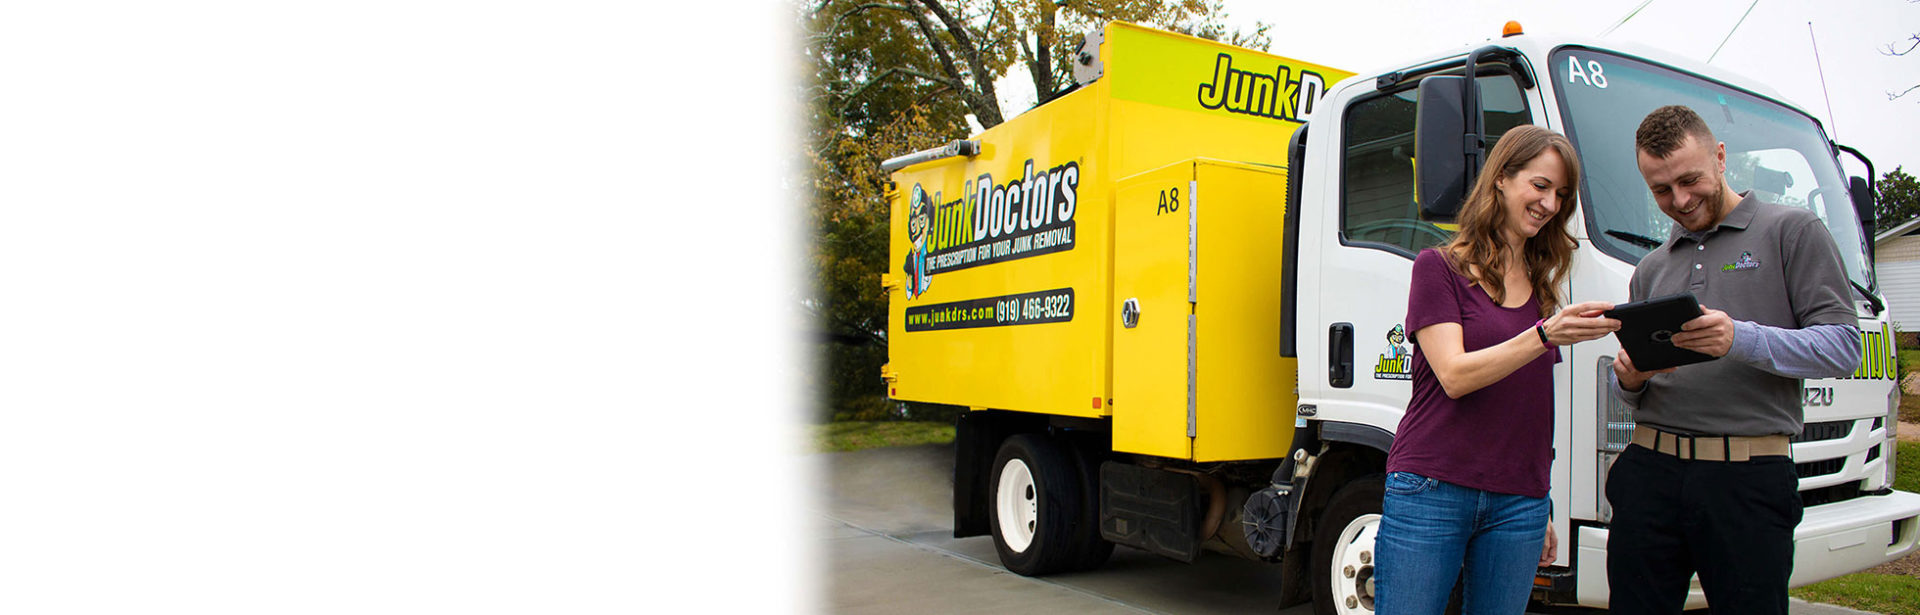 Charlotte, NC junk removal services by Junk Doctors